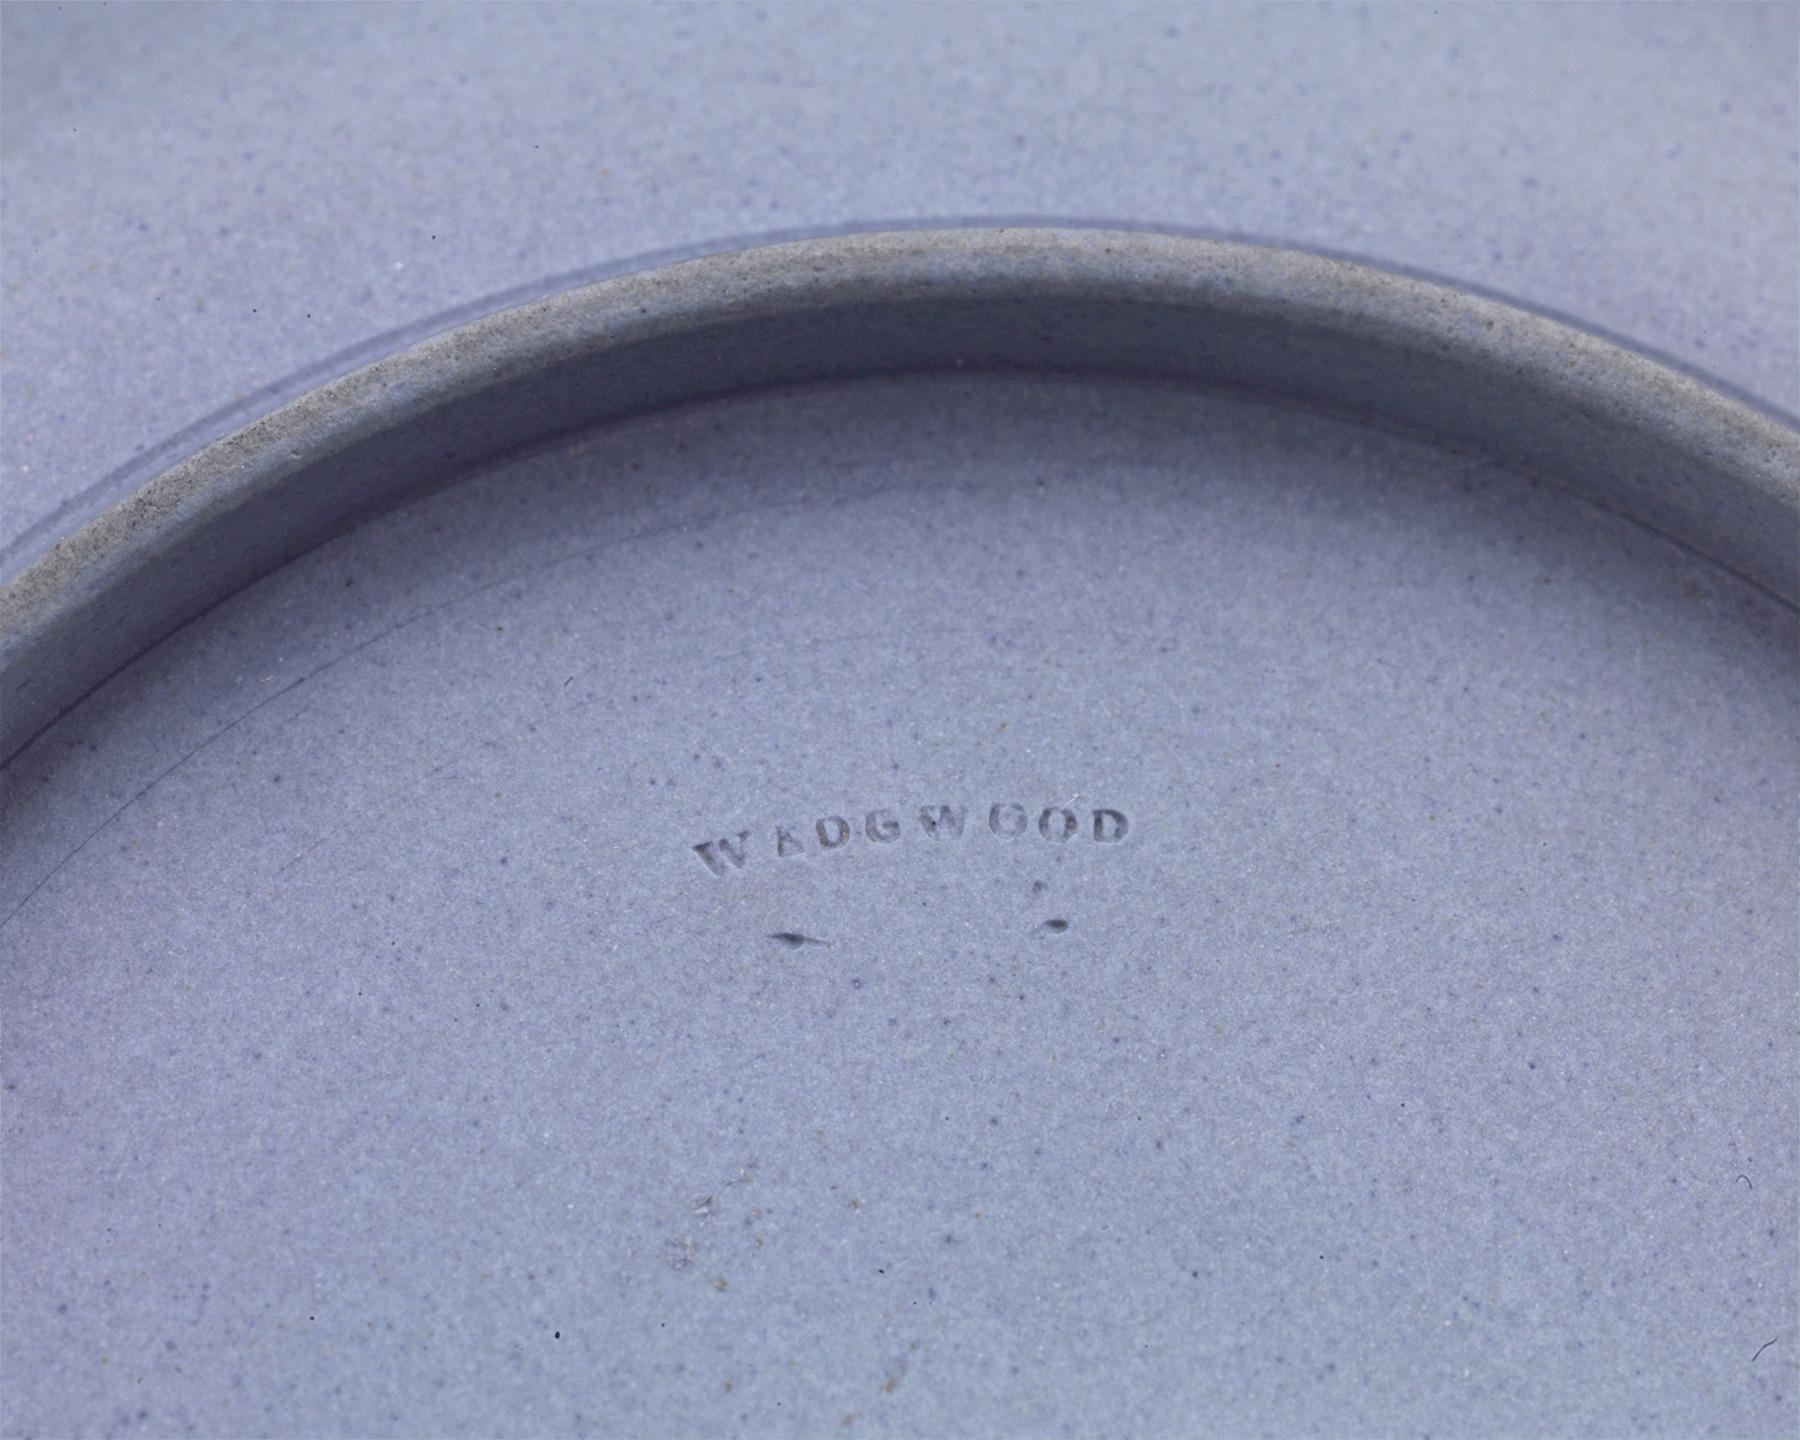 wedgwood cup and saucer blue